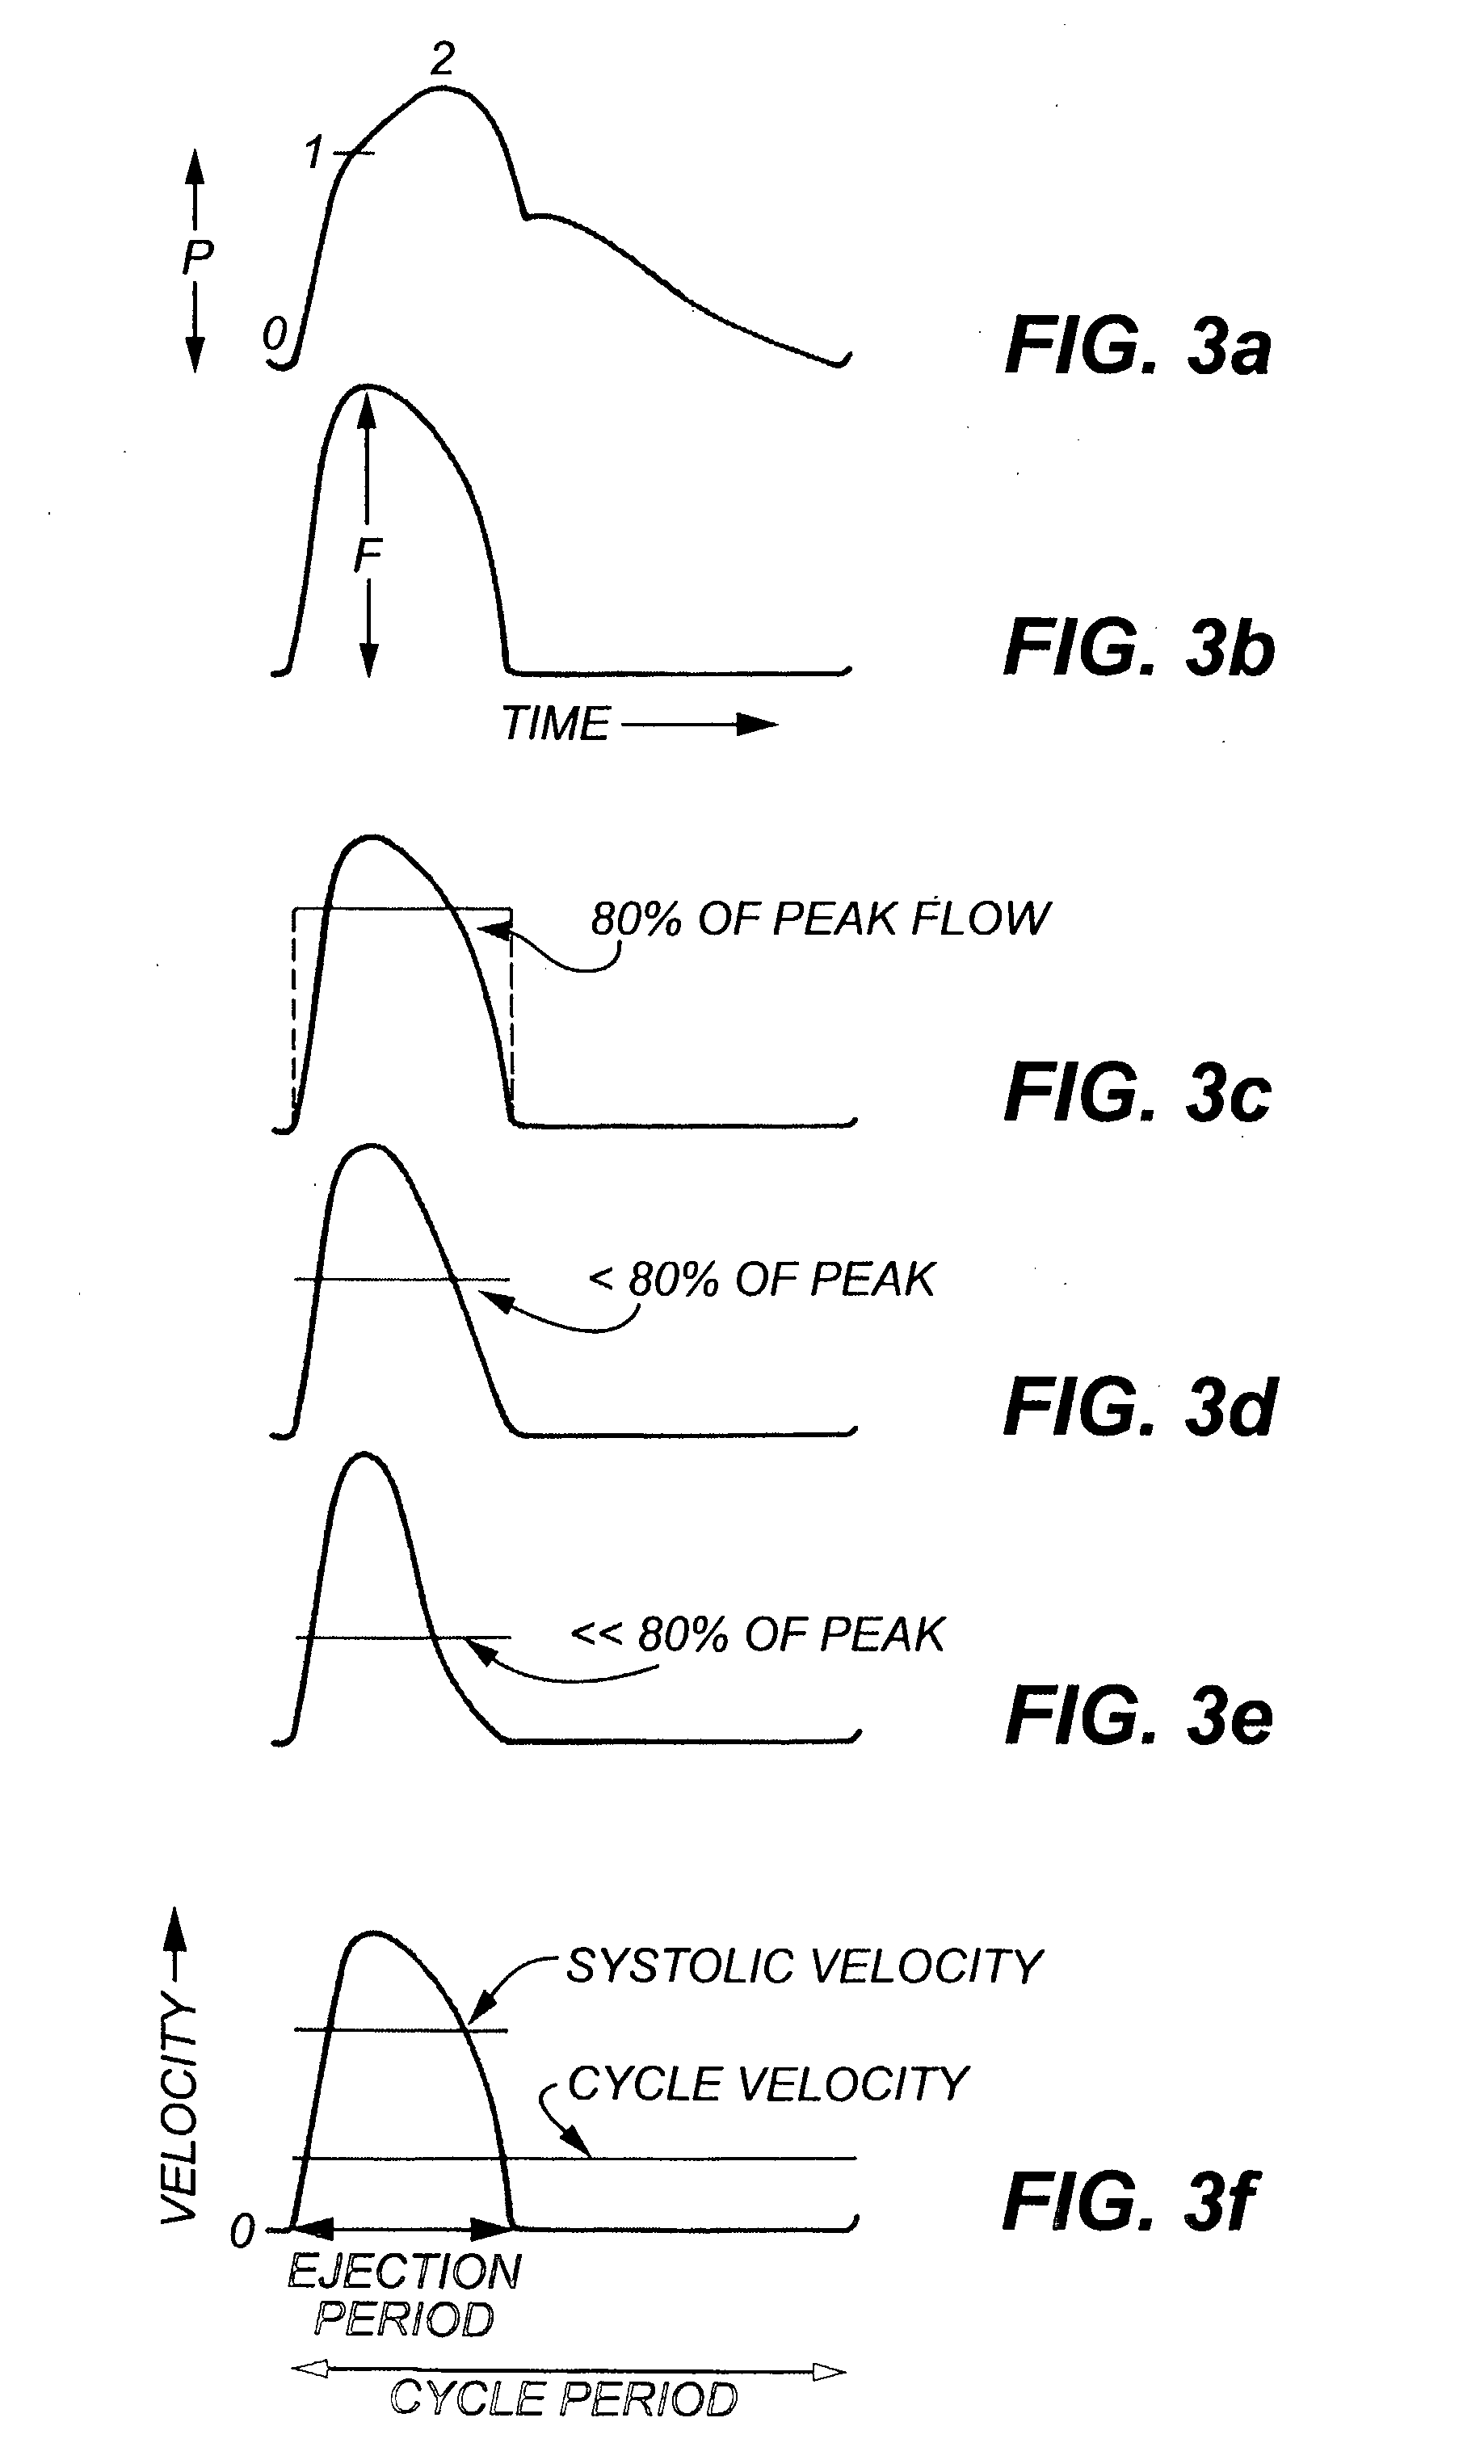 Method and apparatus for determination of cardiac output from the arterial pressure pulse waveform